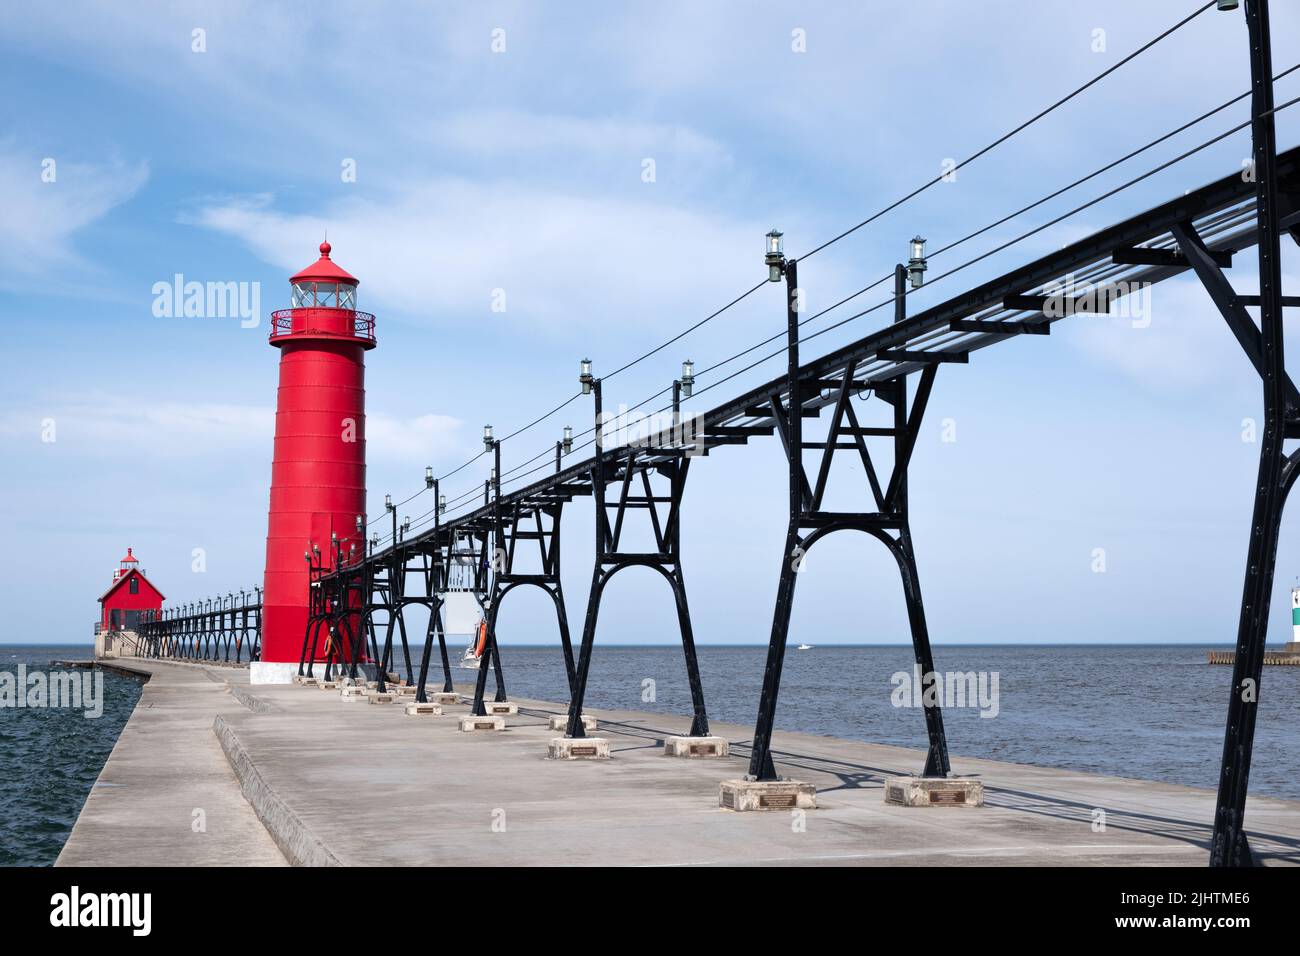 Landscape of the Grand Haven Lighthouse, pier, and catwalk, Lake Michigan, Michigan, USA Stock Photo